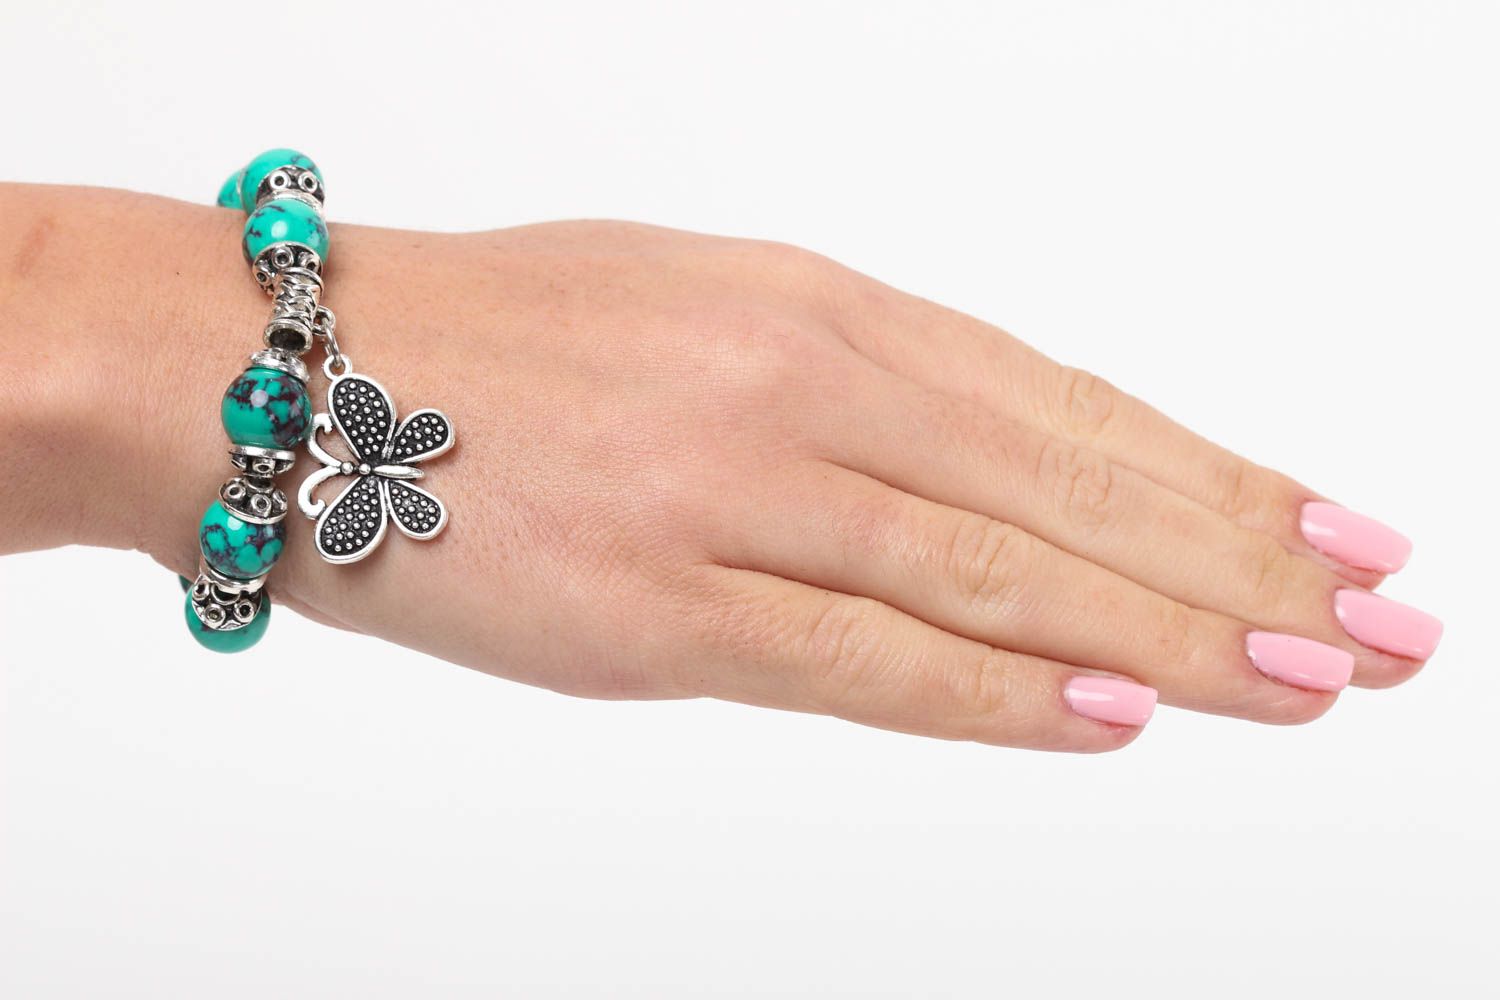 Natural turquoise stone beaded wrist bracelet with metal charms and central butterfly charm photo 5